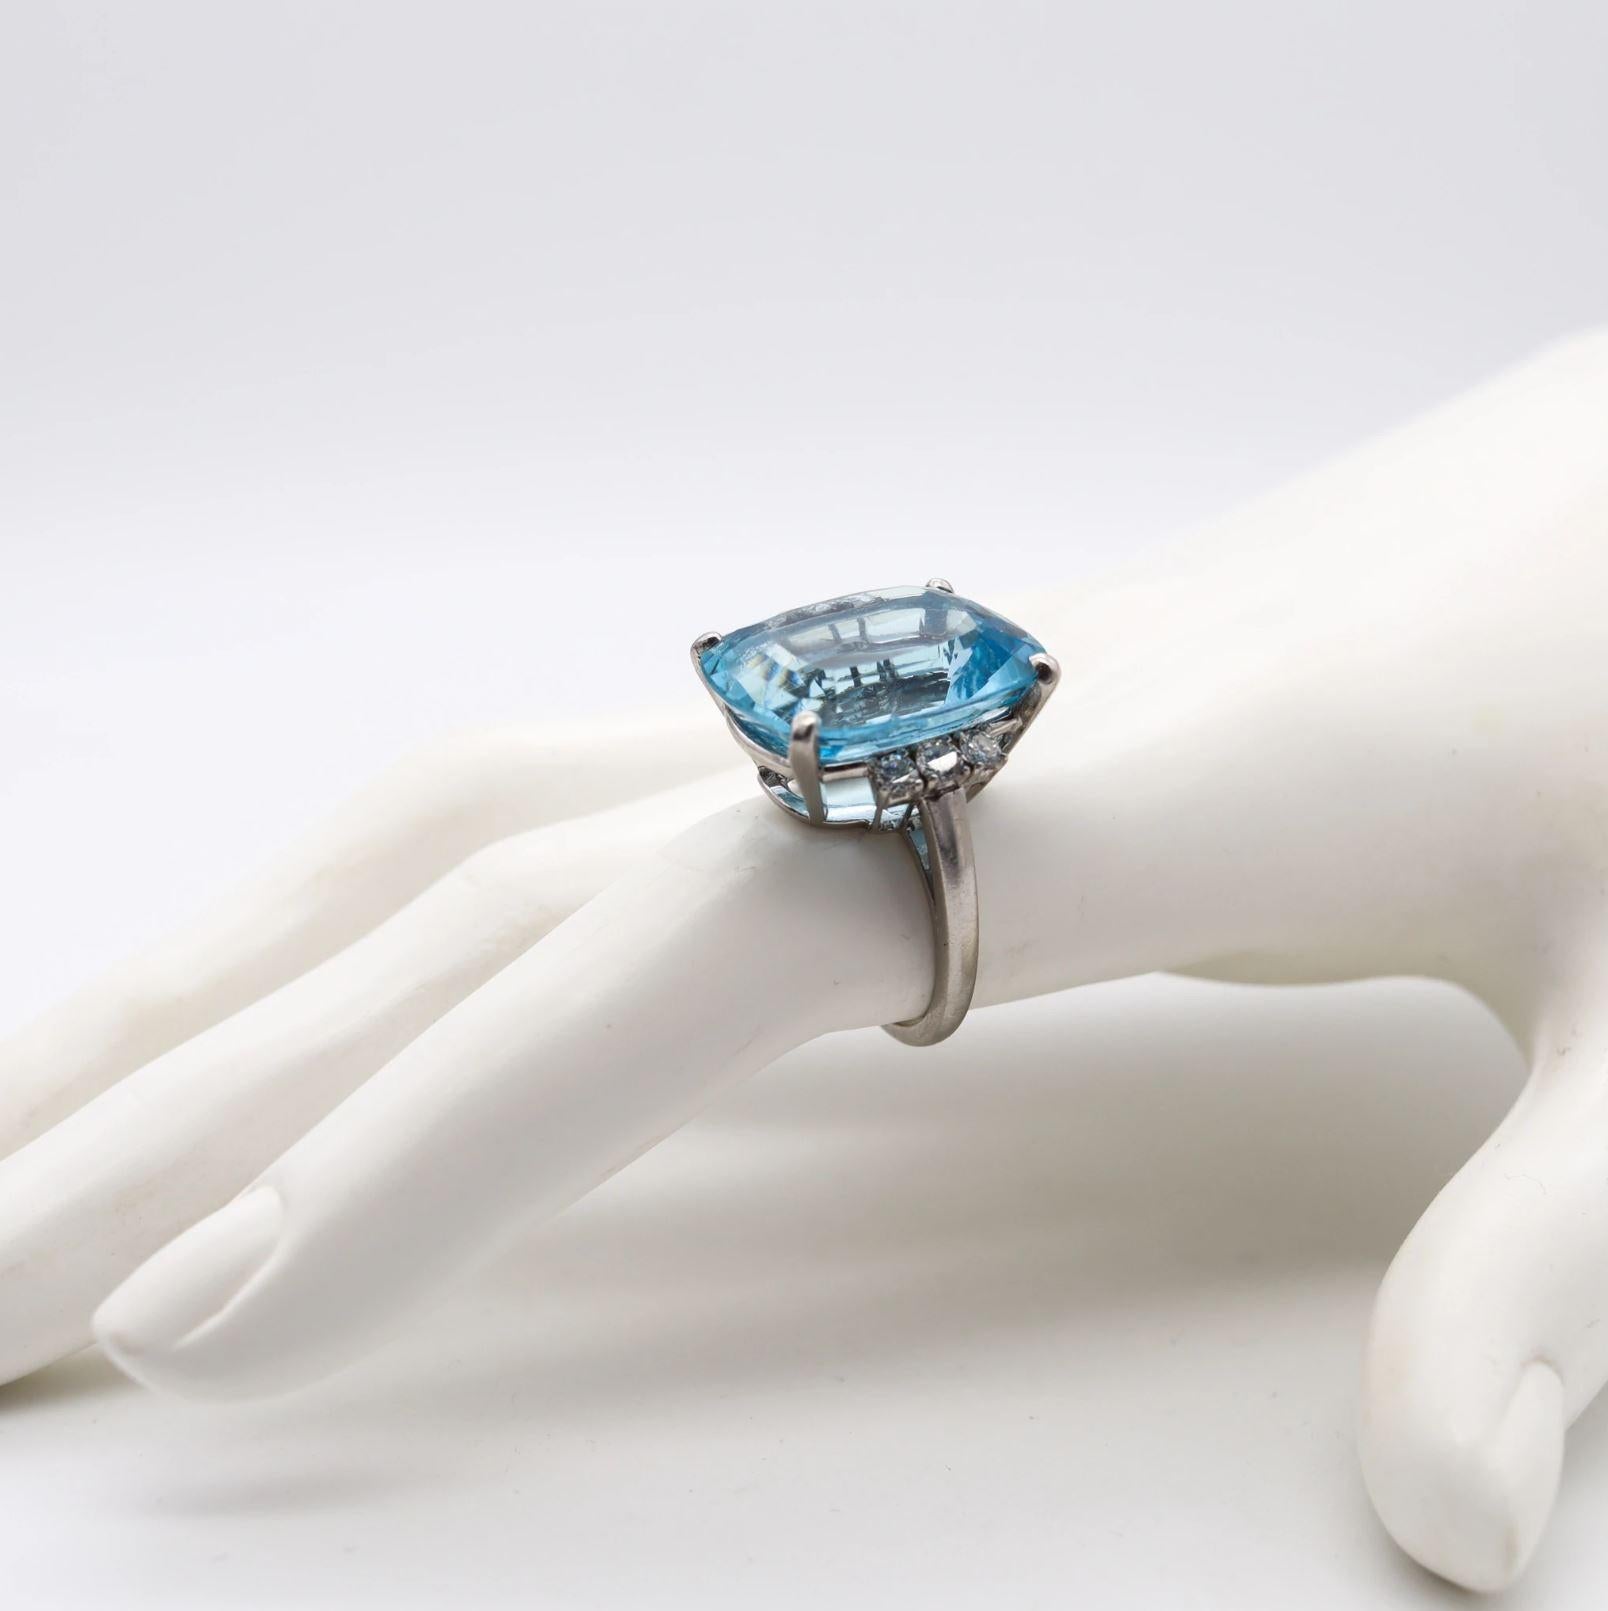 Women's Tiffany & Co. GIA Certified 1960 Cocktail Ring Platinum with 19.17 Ct Aquamarine